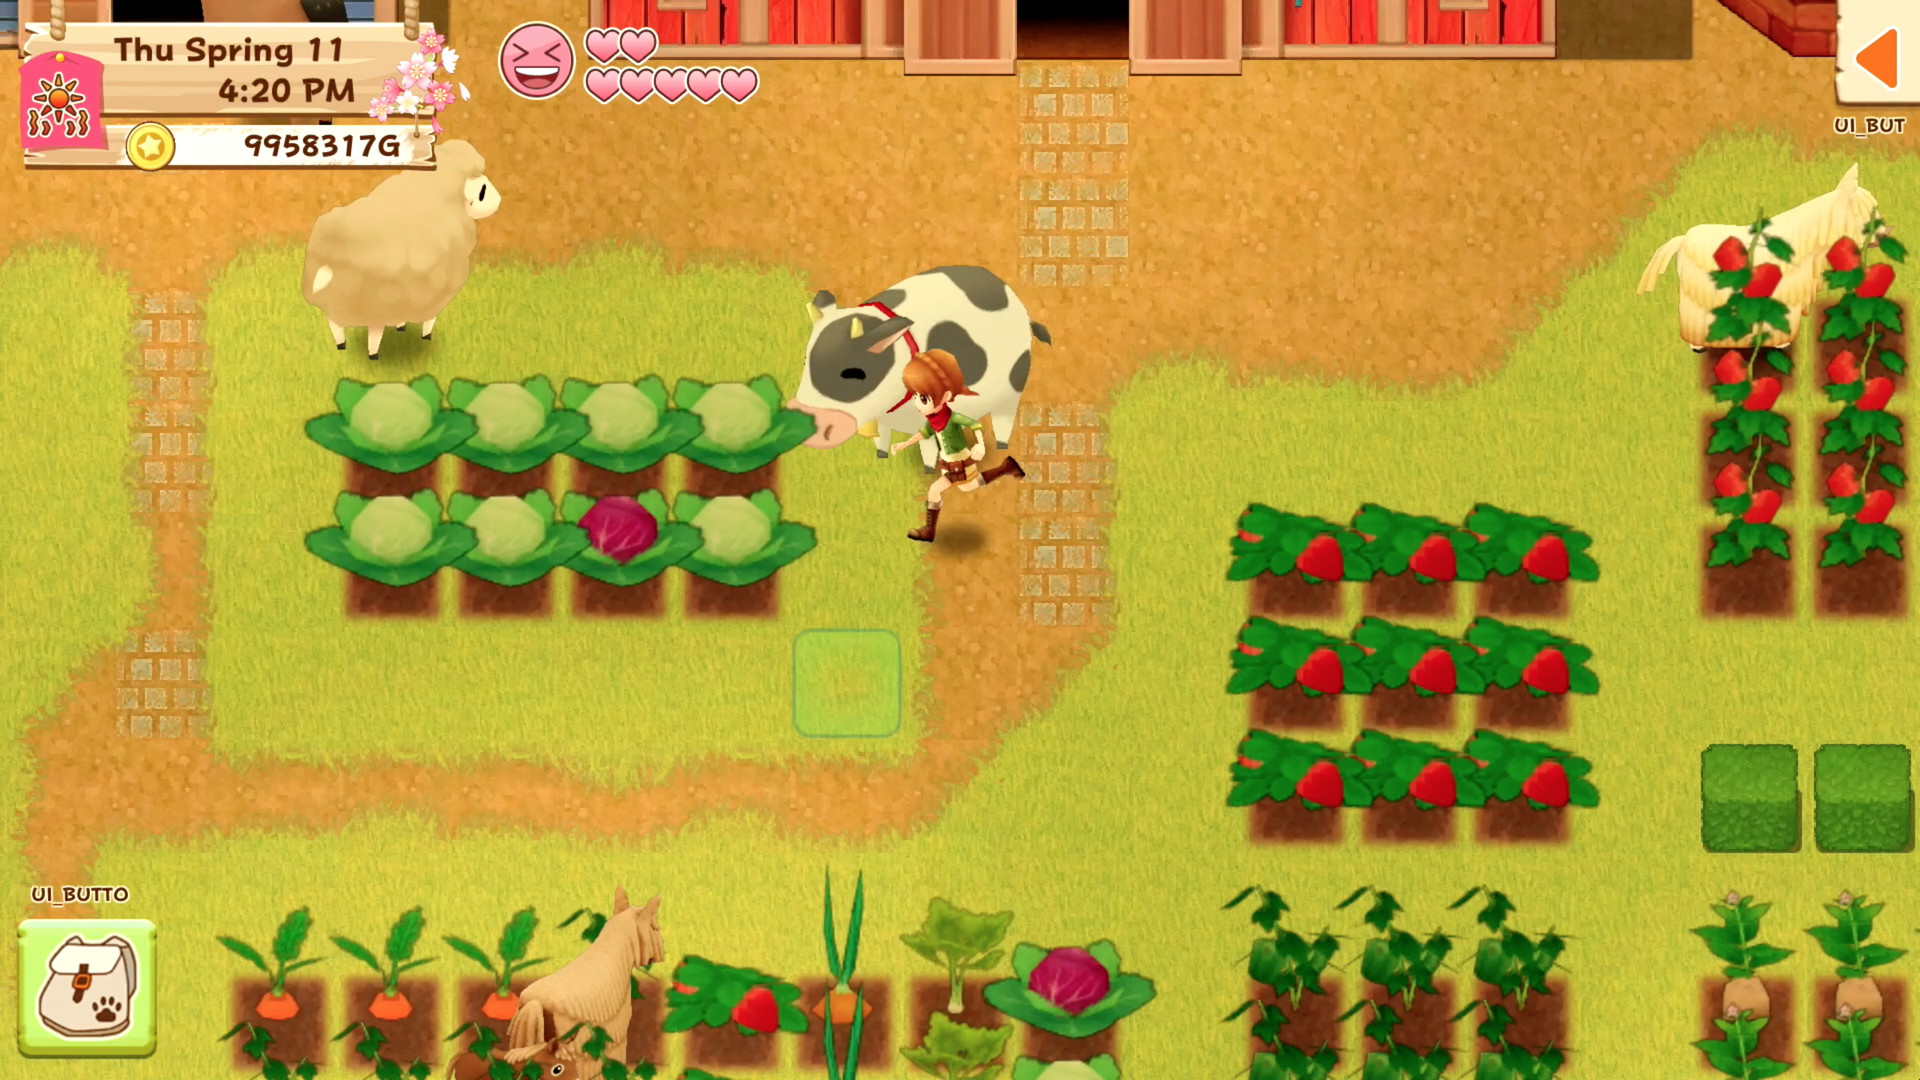 Harvest Moon: Light of Hope Complete Your Set RoW Steam CD Key, 15.24$